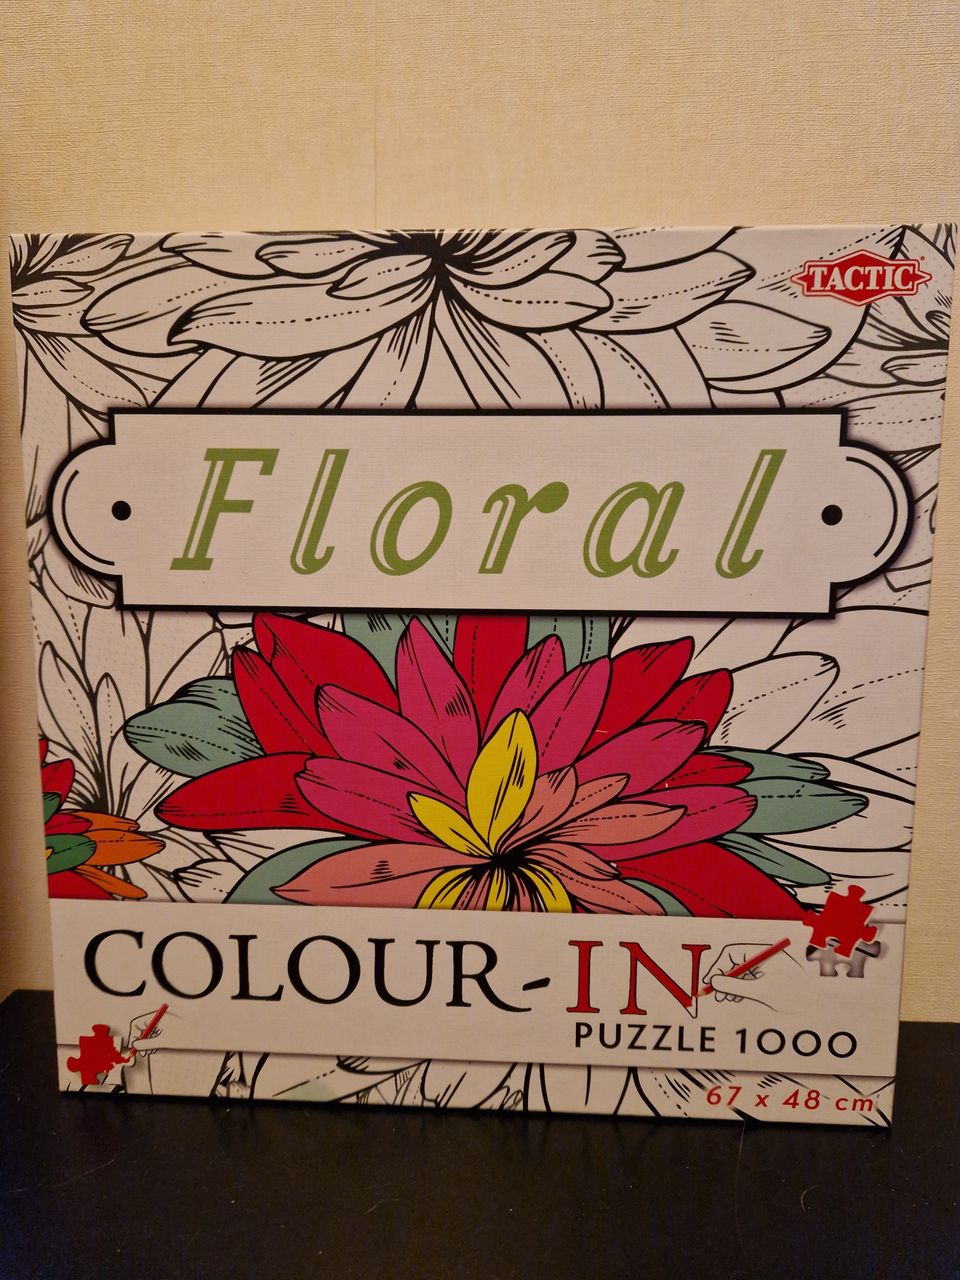 Tactic Floral Colour-in Puzzle 1000 - Tuhannen palan väritys palapeli.